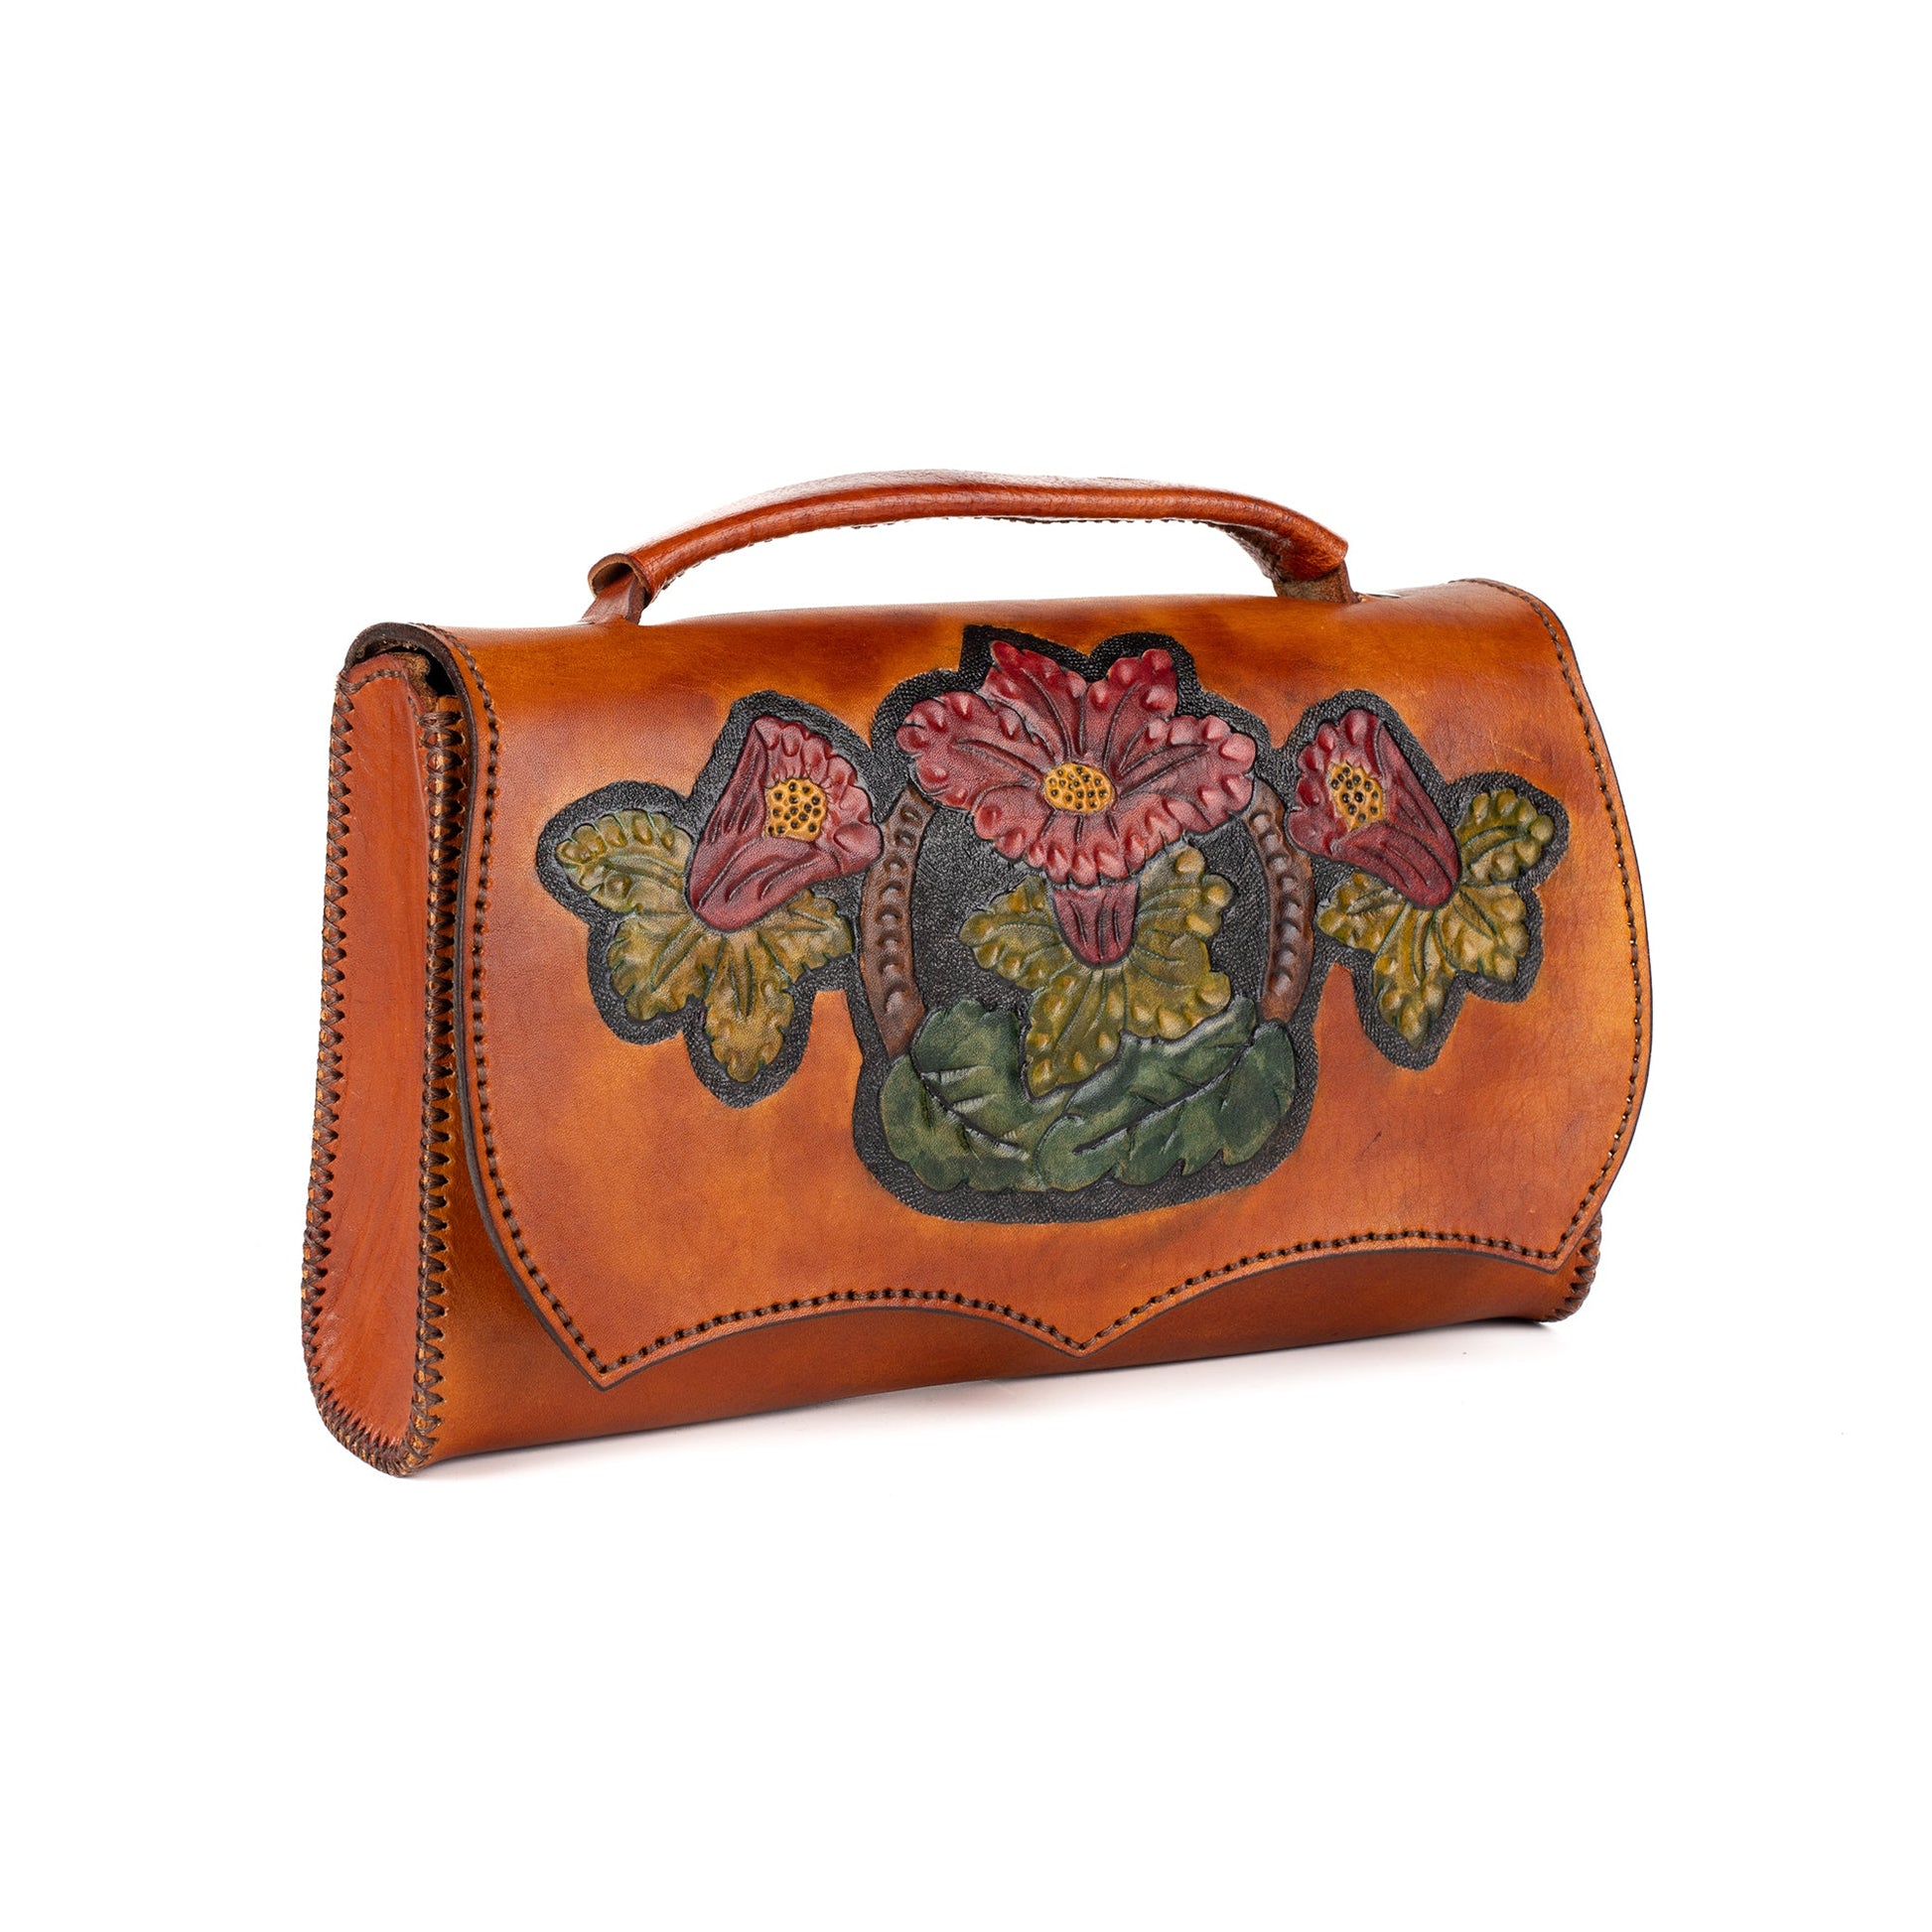 Mylasa Leather Carved & Crafted Hand Bag - Handbags Zengoda Shop online from Artisan Brands